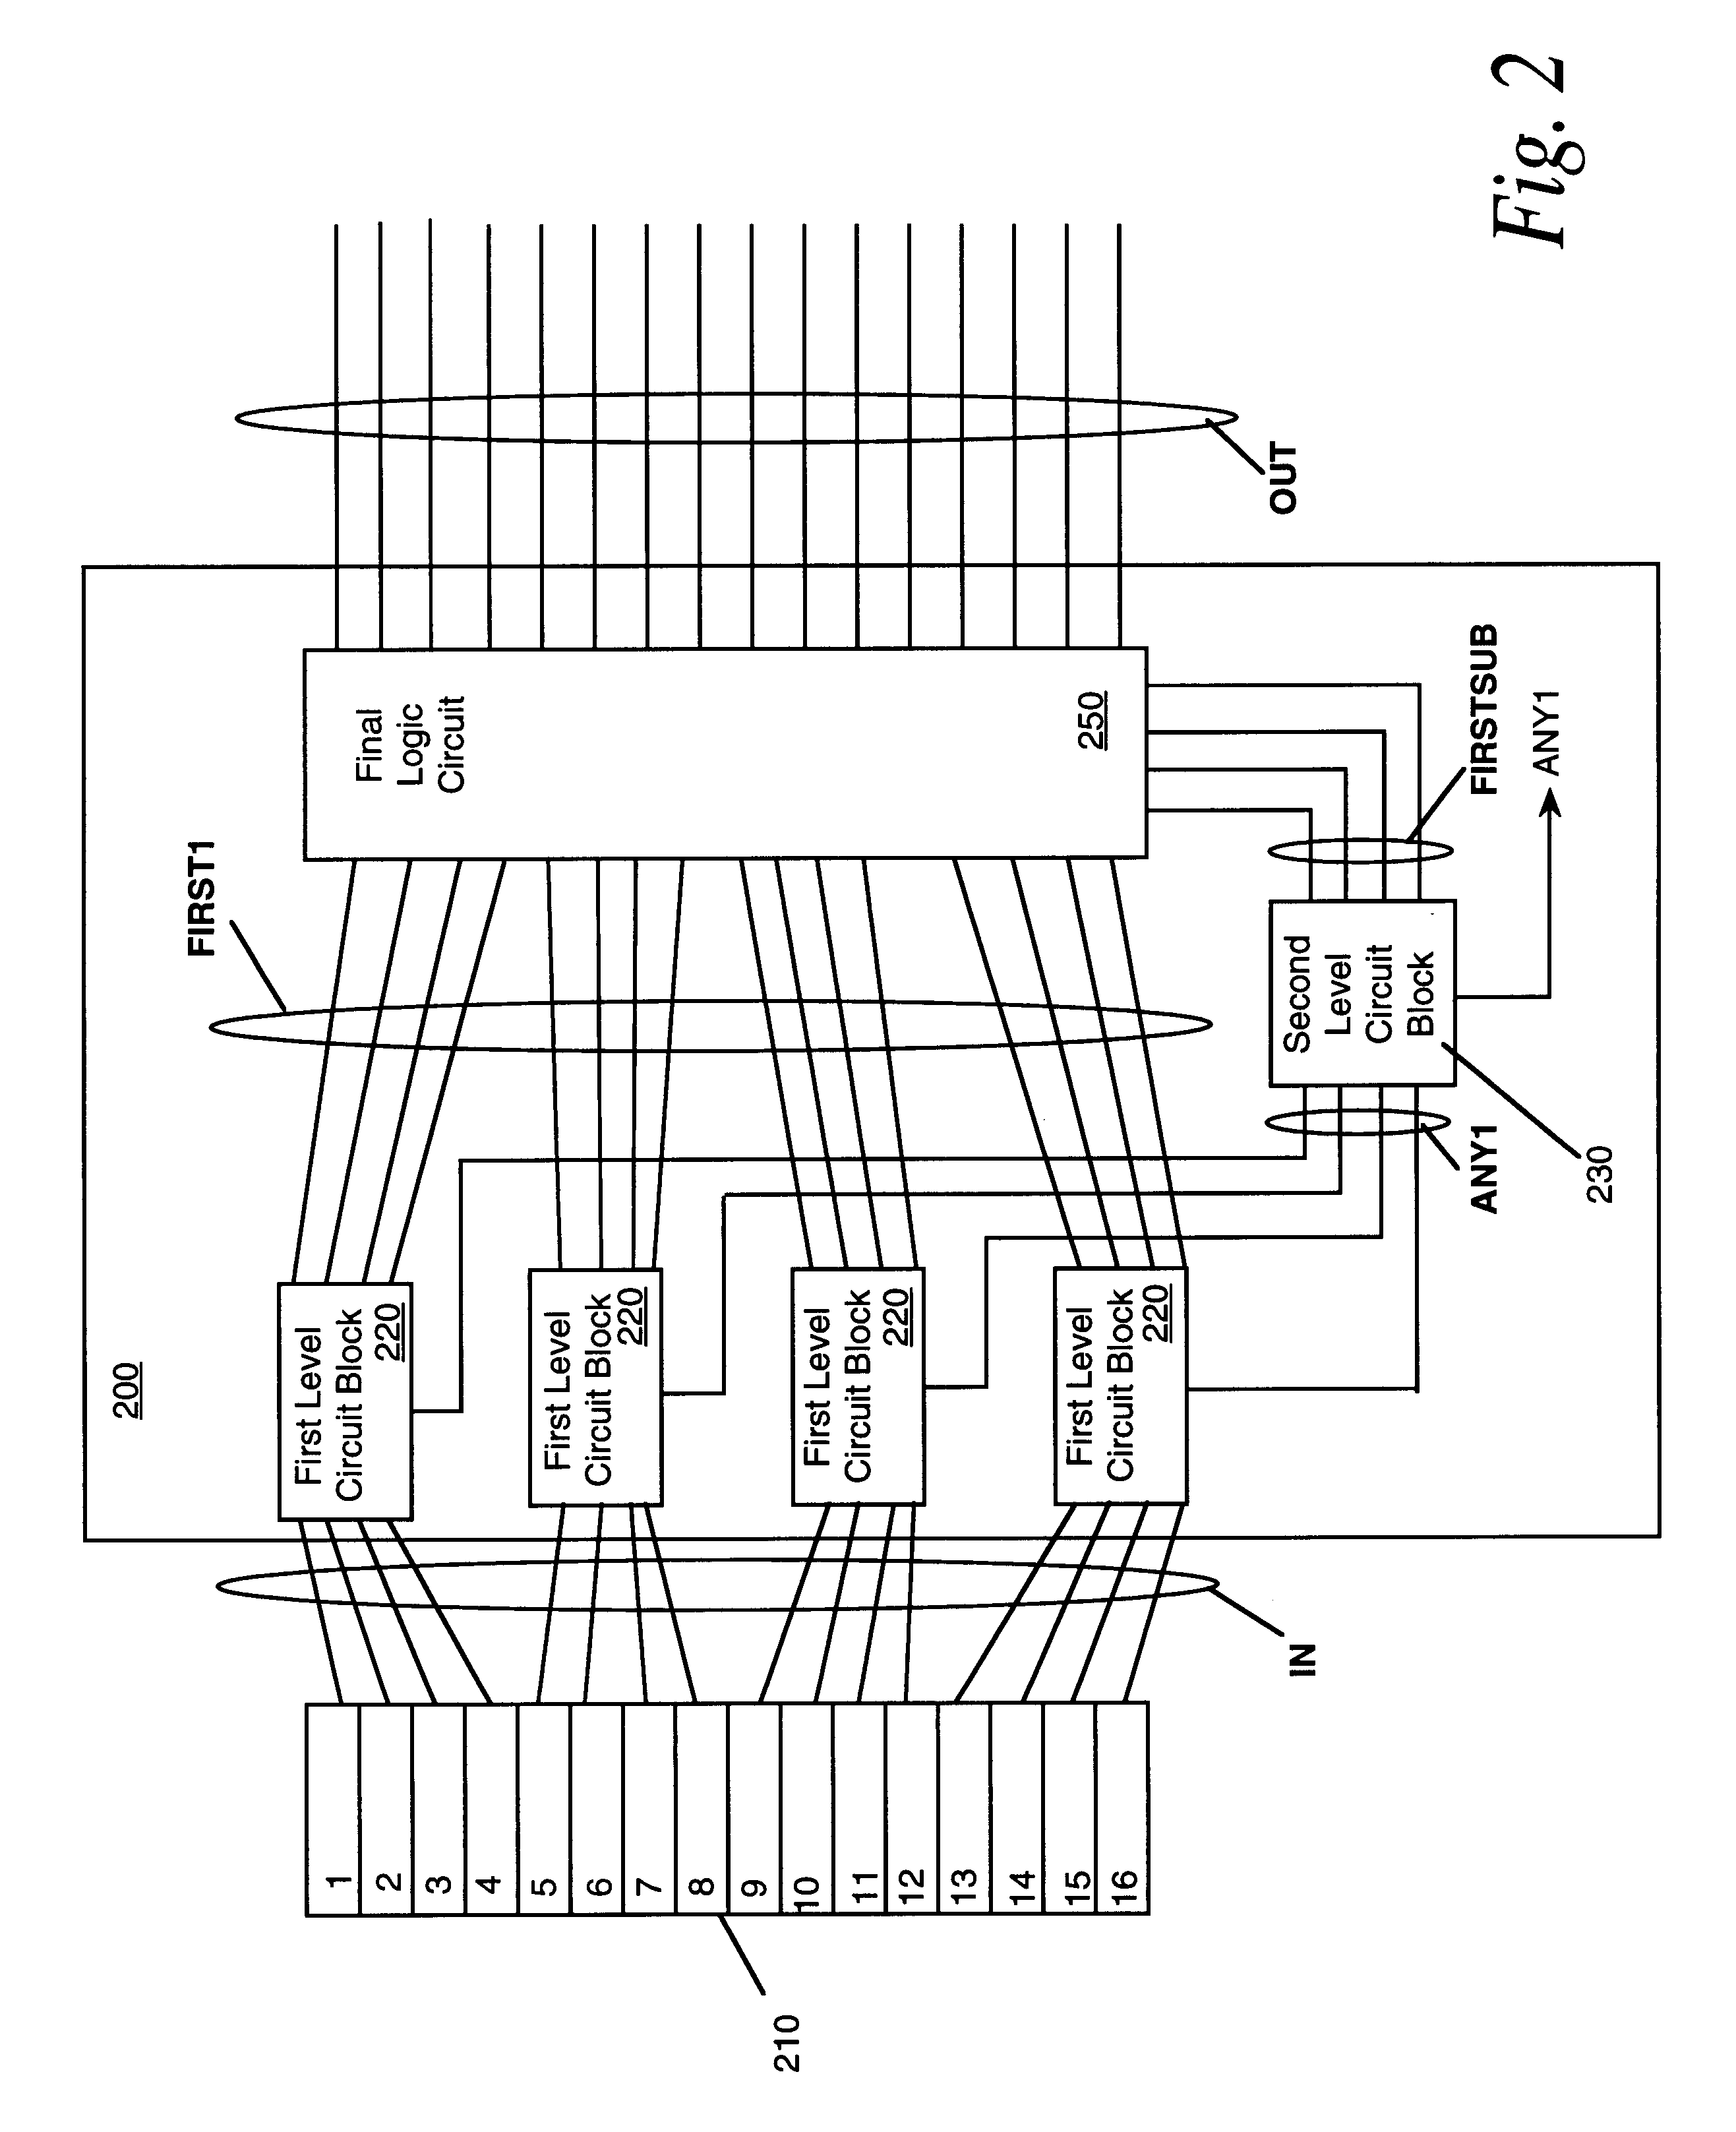 Method and apparatus for finding a first element